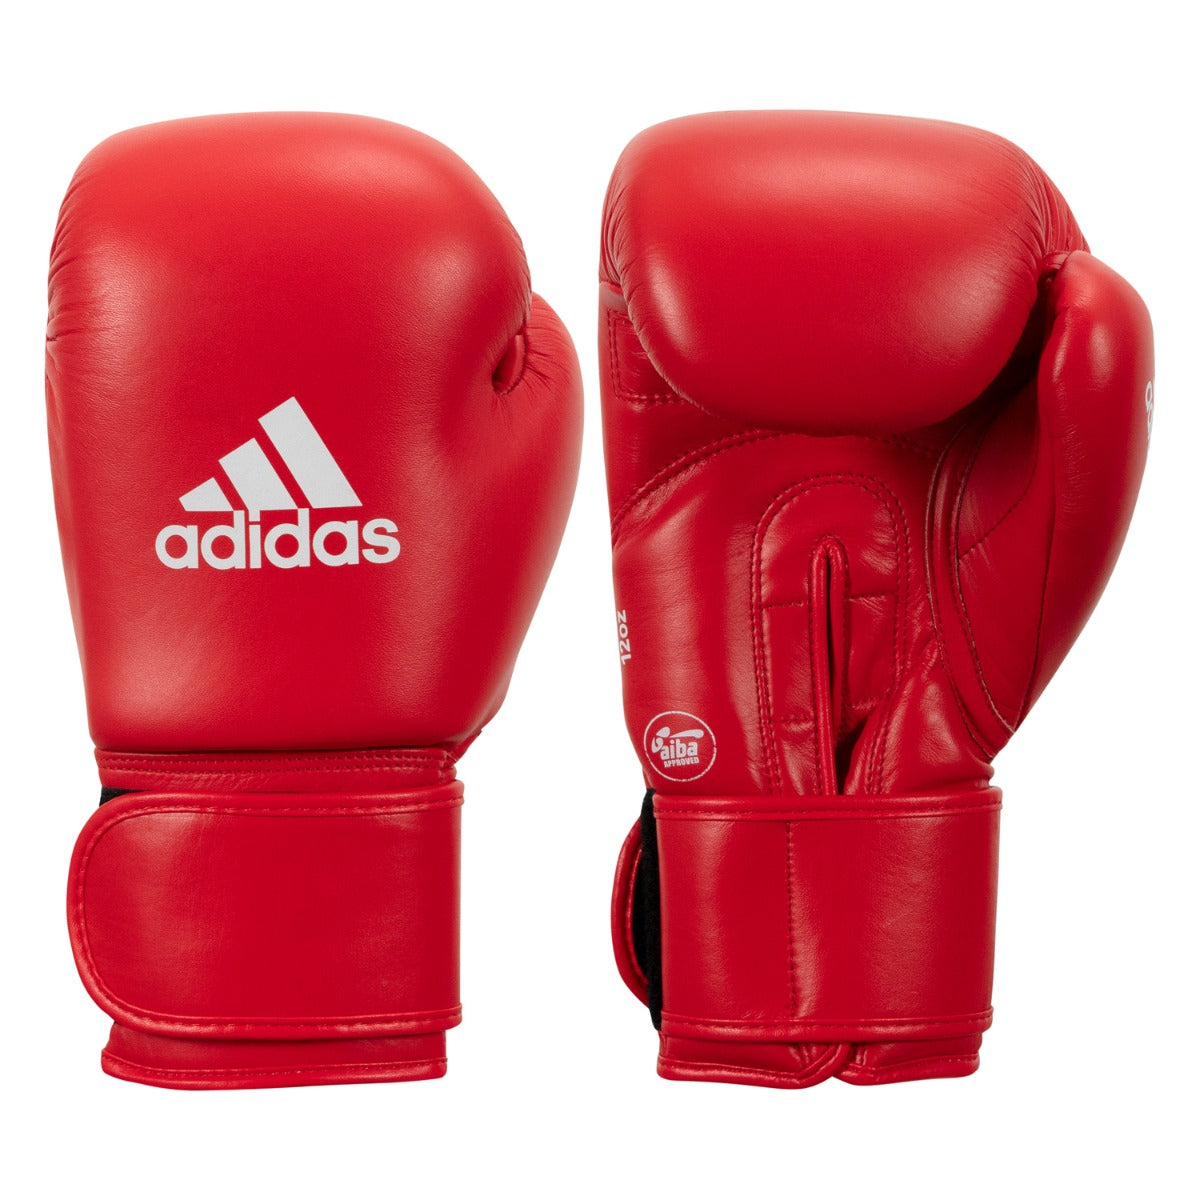 adidas AIBA Competition Gloves TITLE Boxing Gear